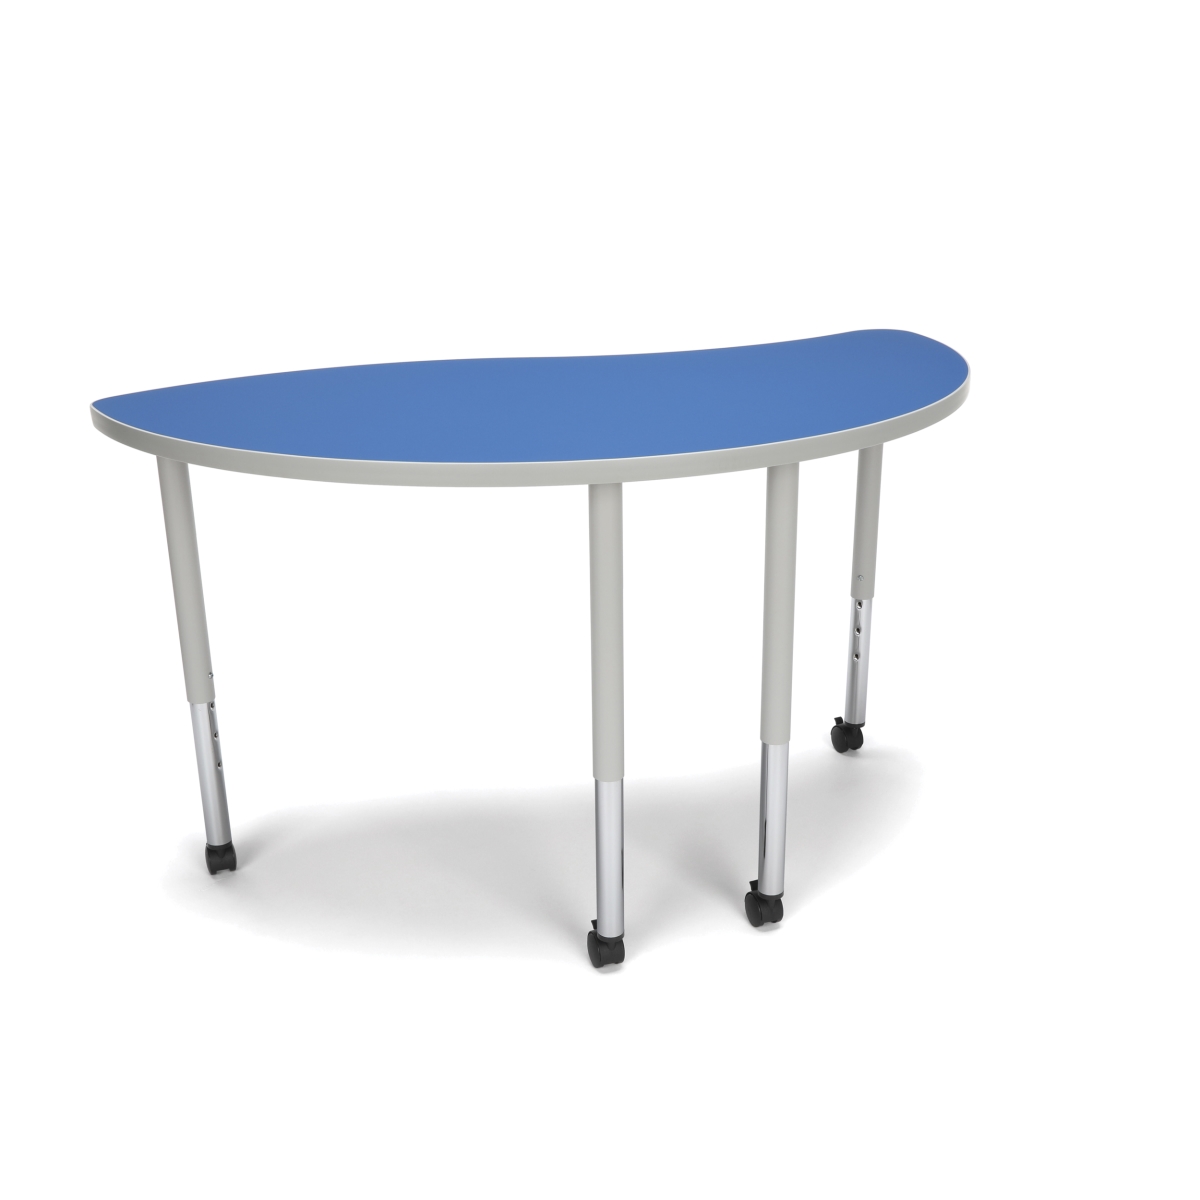 Ying-llc-blu Adapt Series Ying Standard Table - 25-33 In. Height Adjustable Desk With Casters, Blue